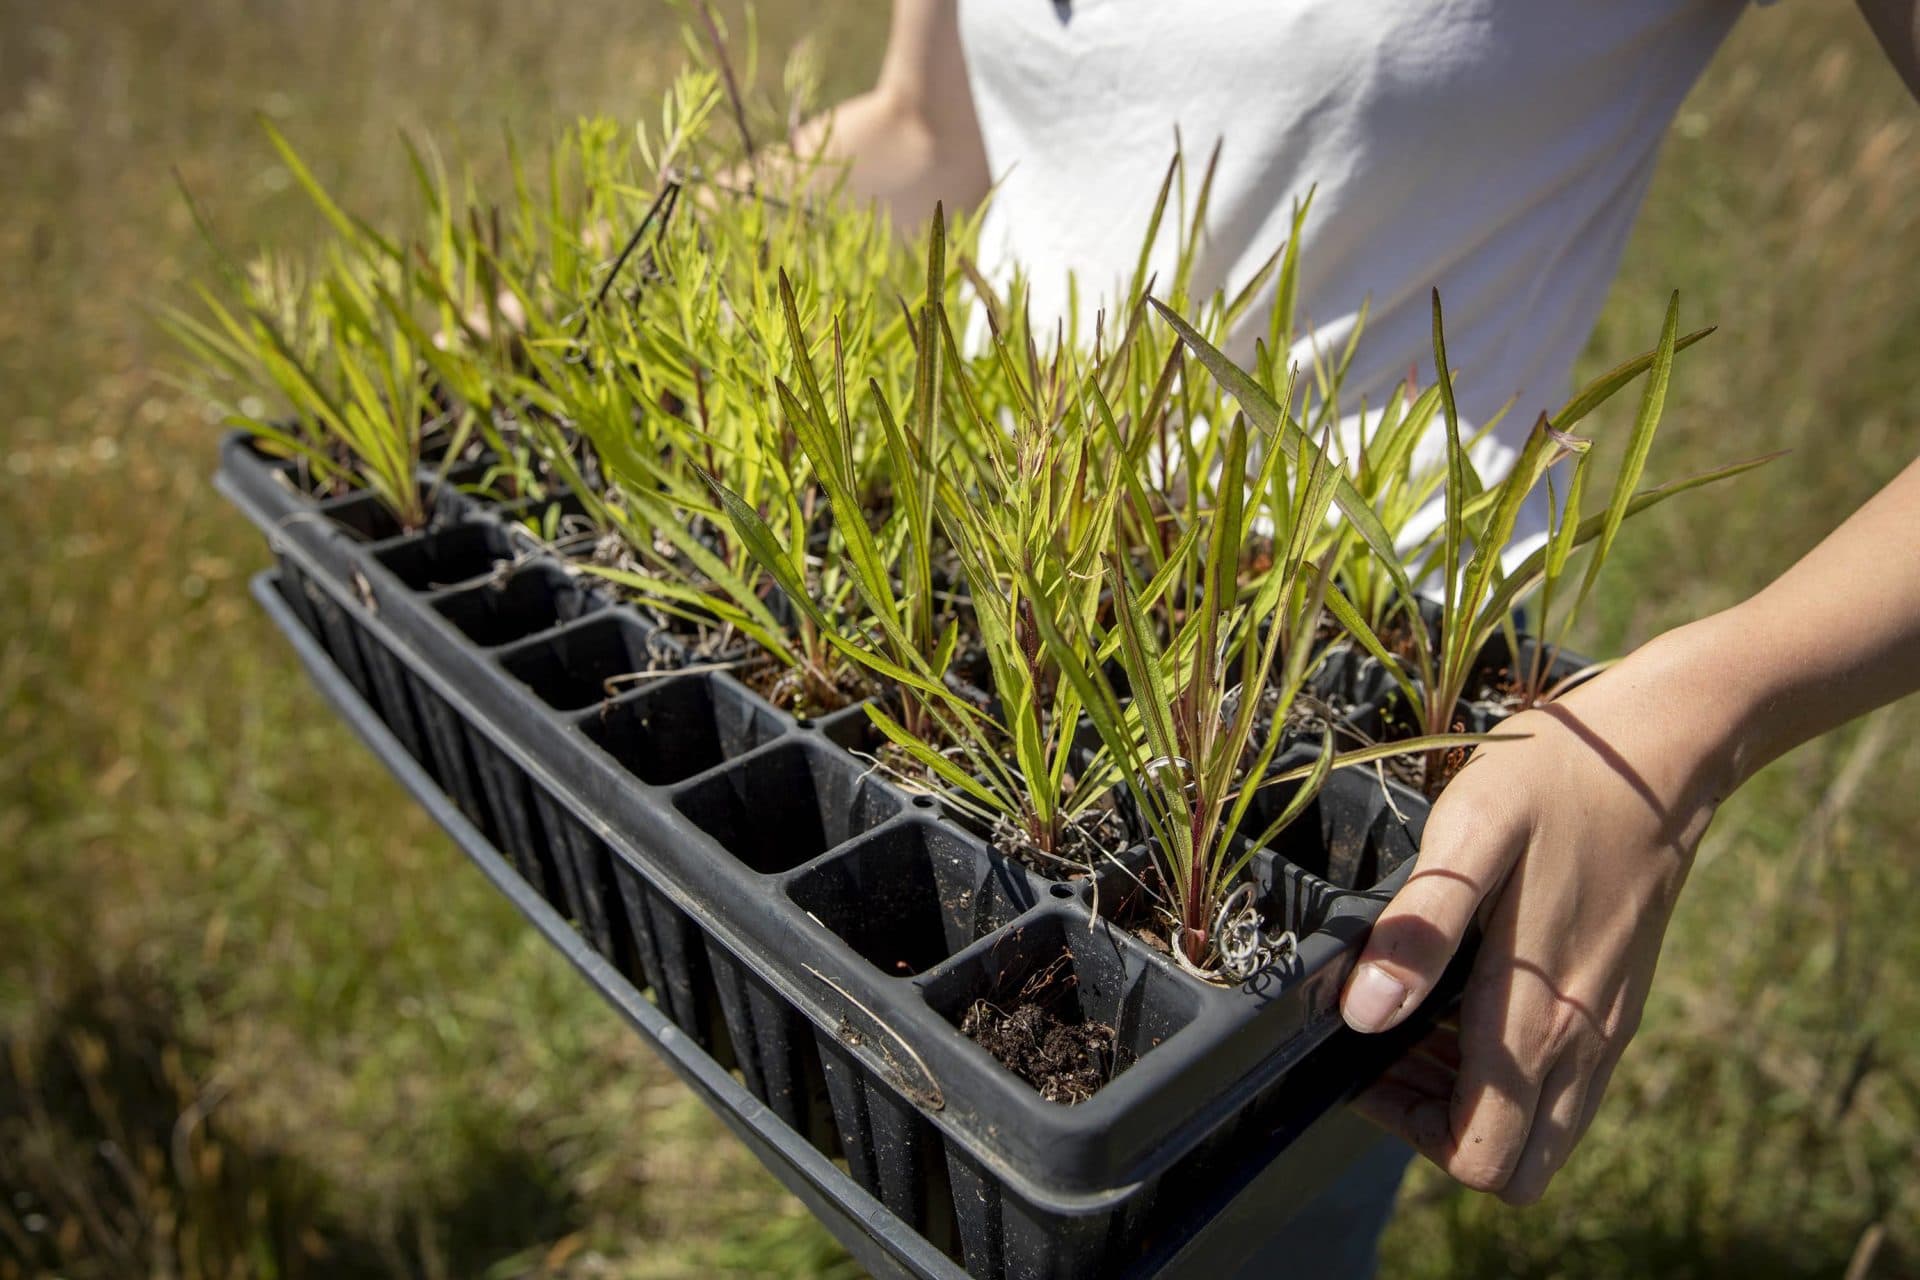 Blazing star seedling, grown and donated by Polly Hill Arboretum, on their way to be planted on the sandplain grasslands at Katama, on Martha's Vineyard. (Robin Lubbock/WBUR)